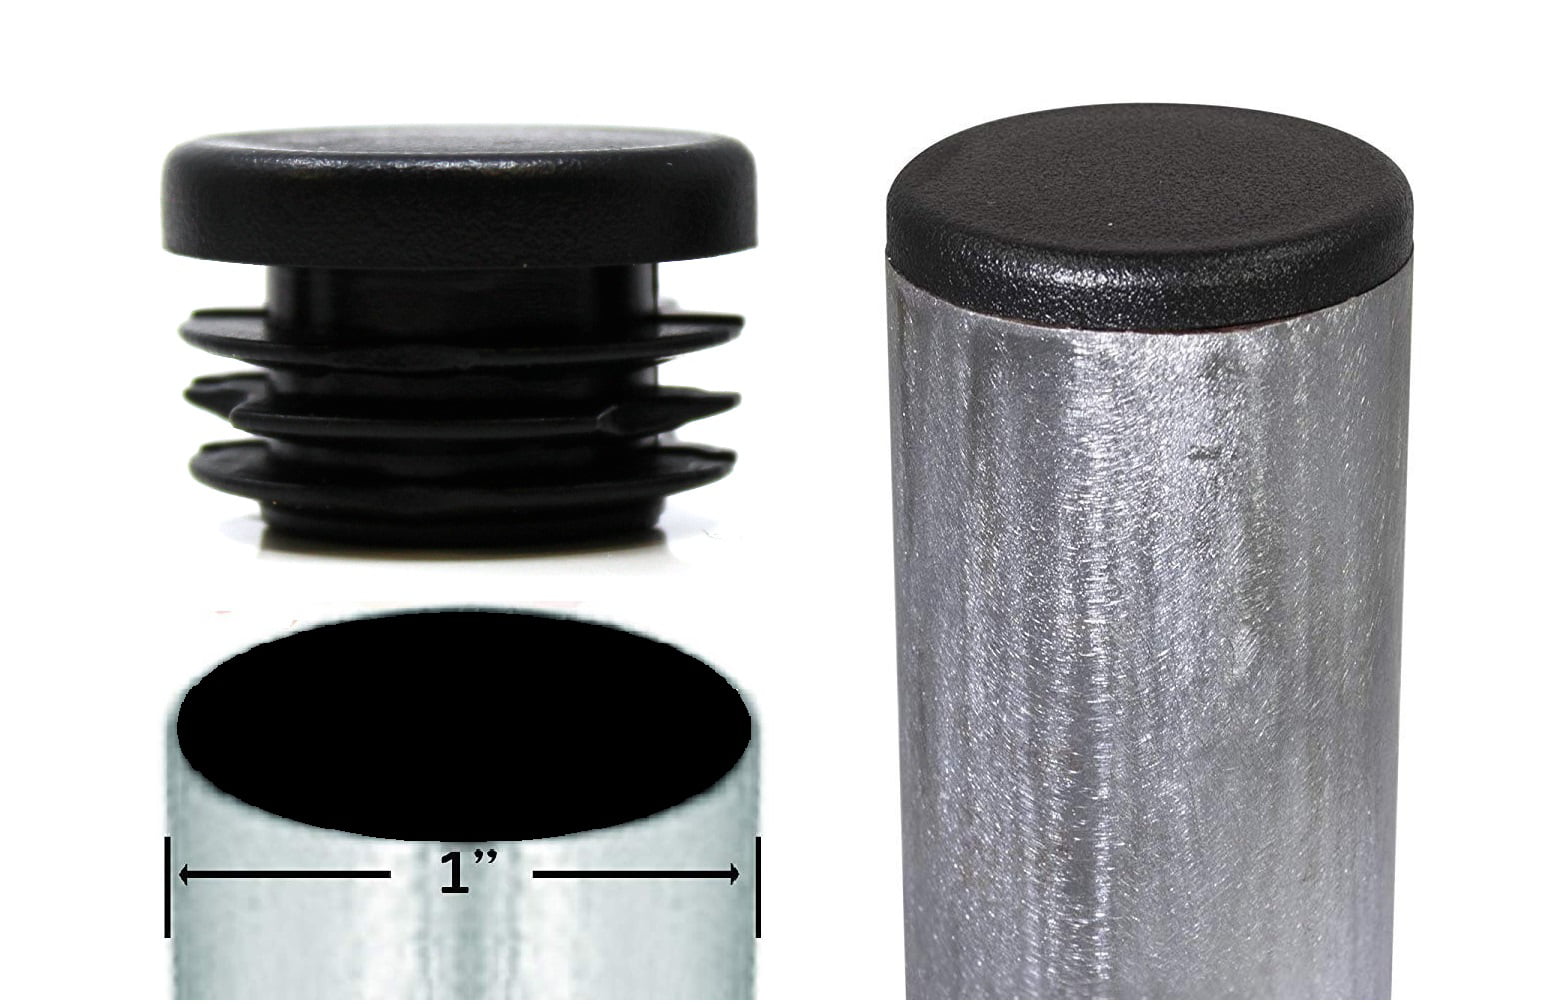 Karcy End Caps Plastic Tube Plug Insert Plug Round Hole Plugs Black Outer Dia 1-inch/25mm Pack of 30 